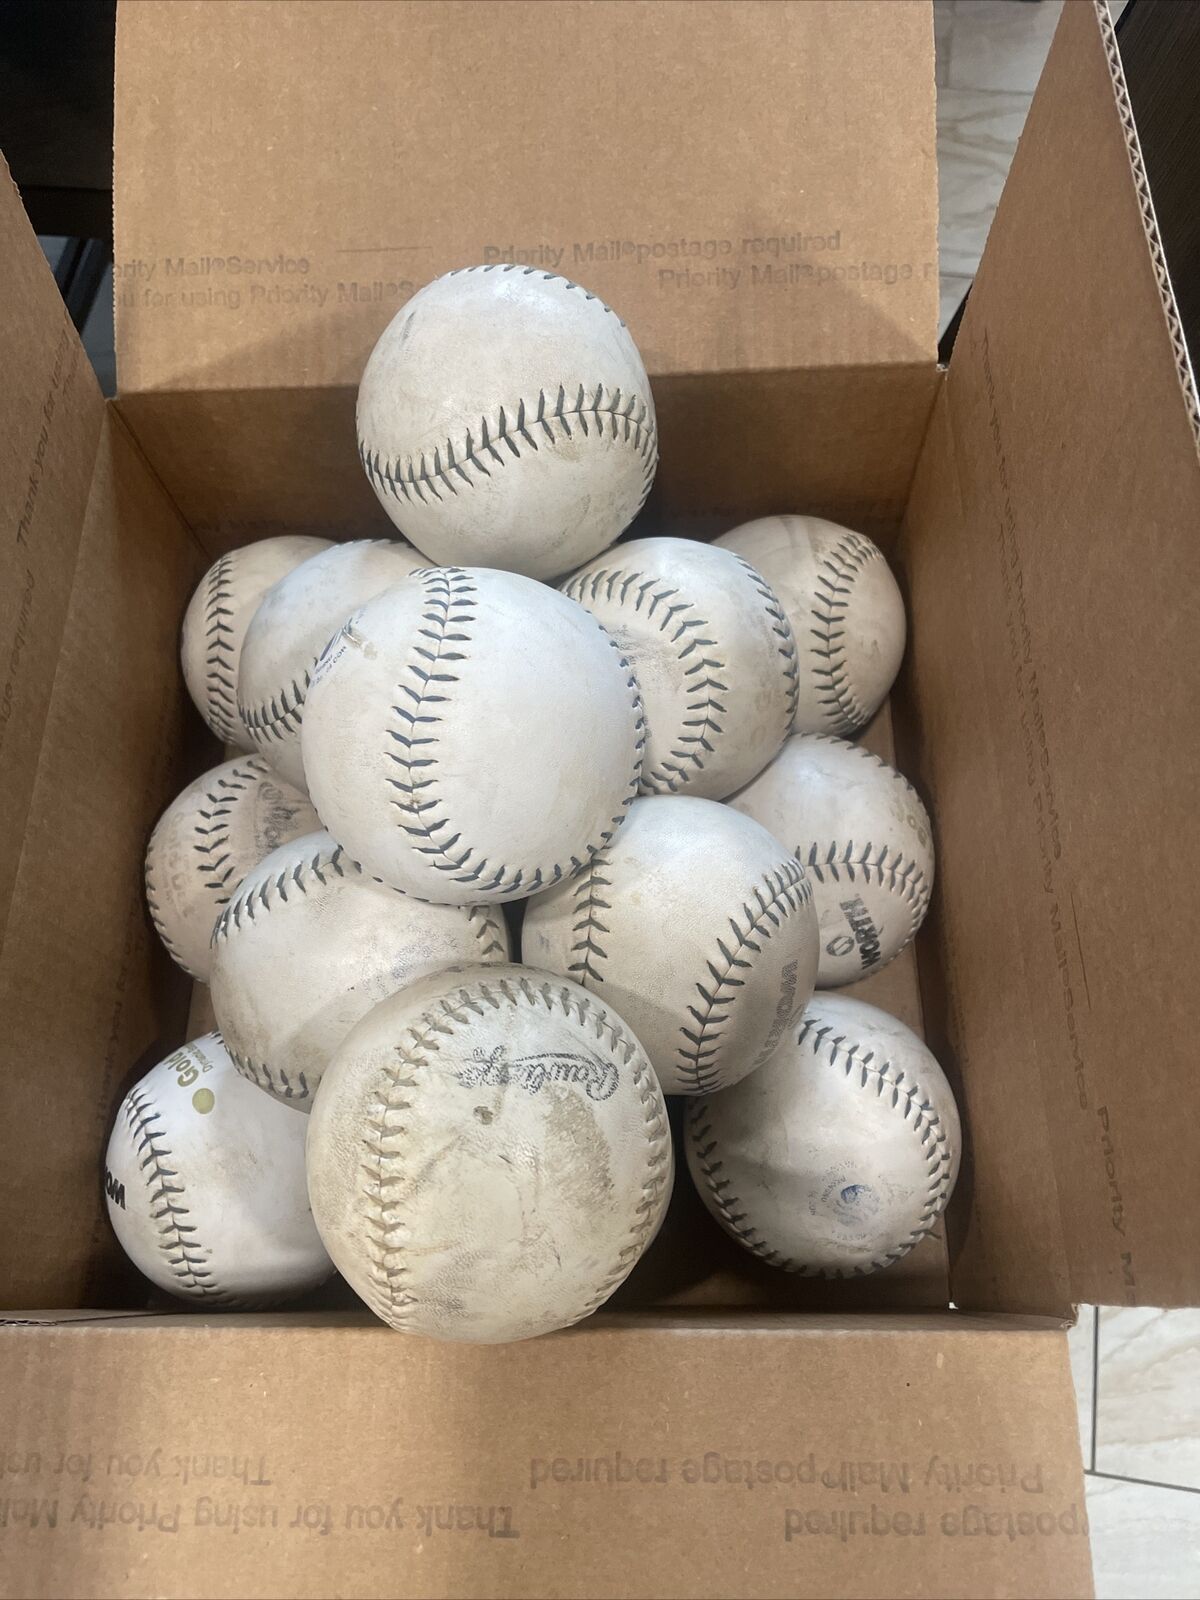 Worth And Other Brands. 12 In. Super Gold Dot Slowpitch Softballs - 16 Balls.